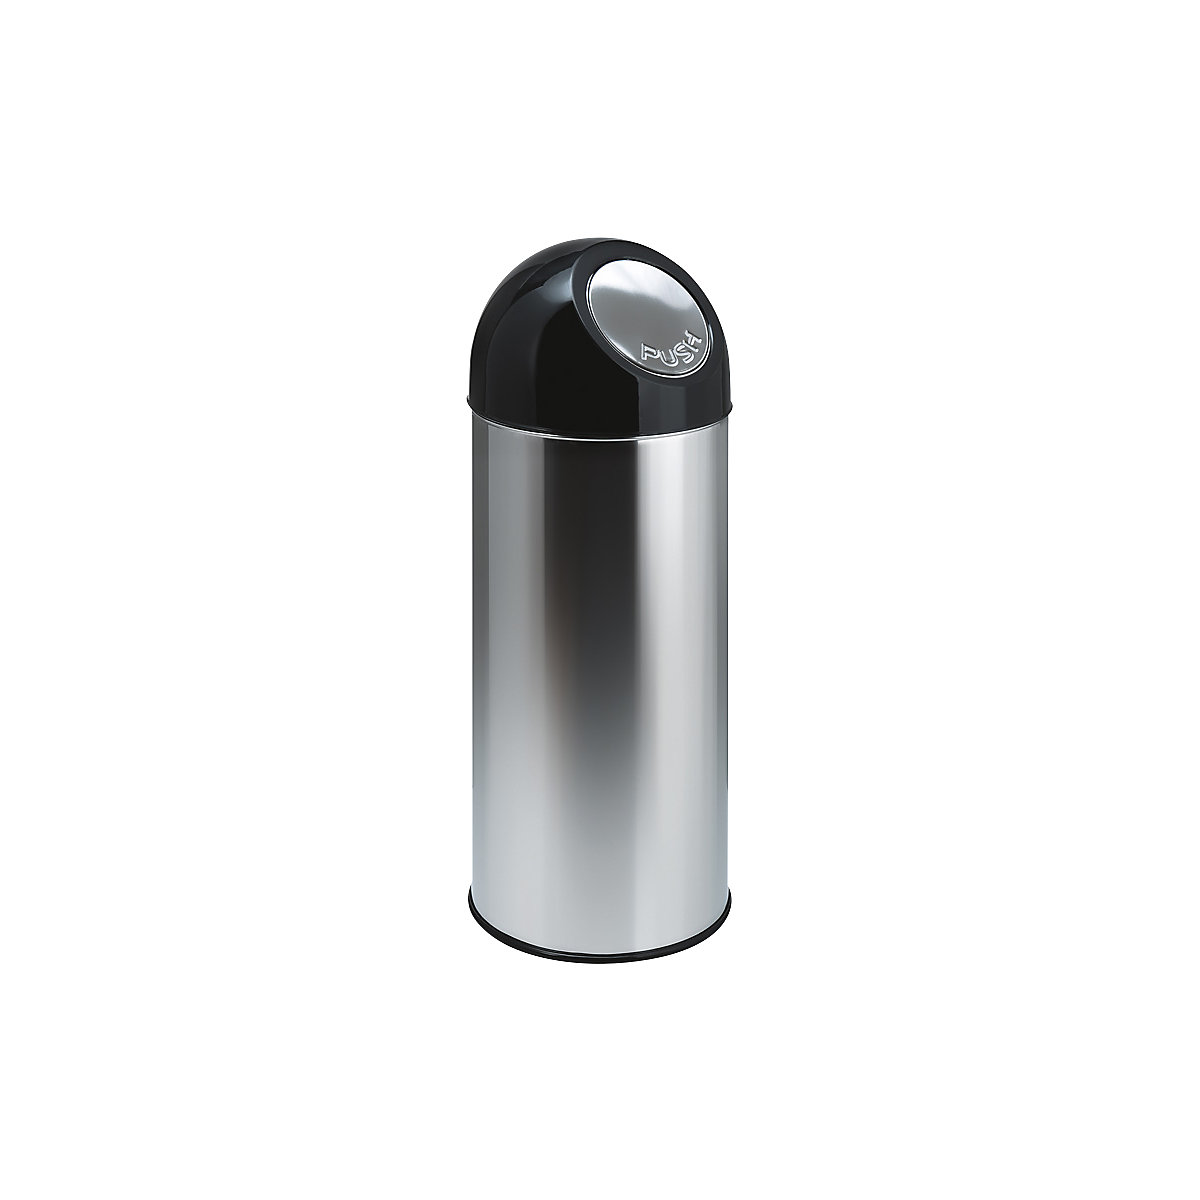 Push rubbish bin, capacity 55 l, zinc plated inner container, stainless steel-5